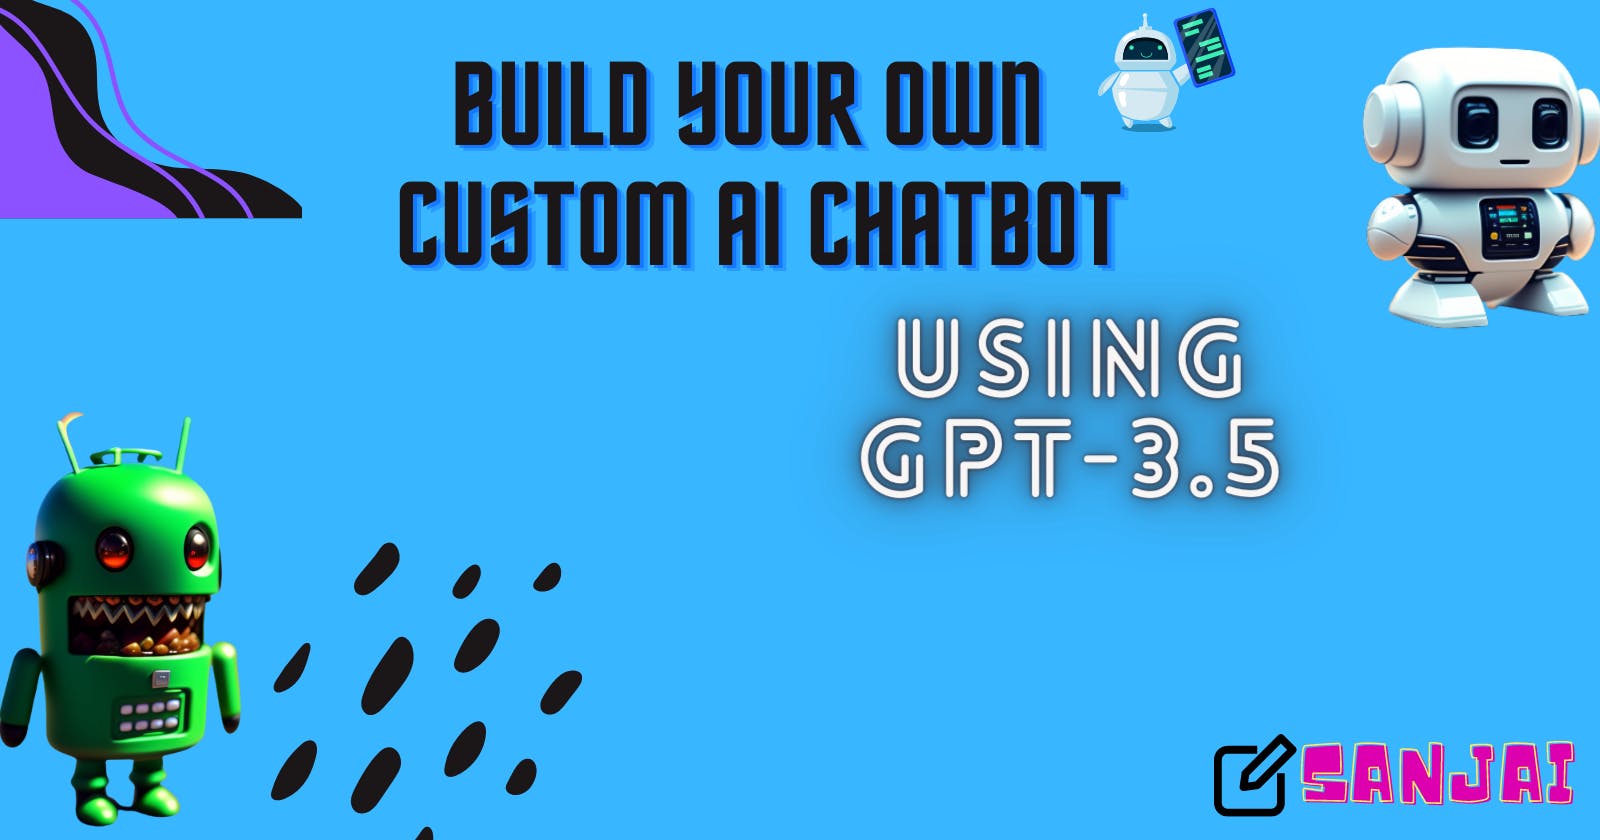 How to Build your Custom Chatbot using LLM   like GPT models